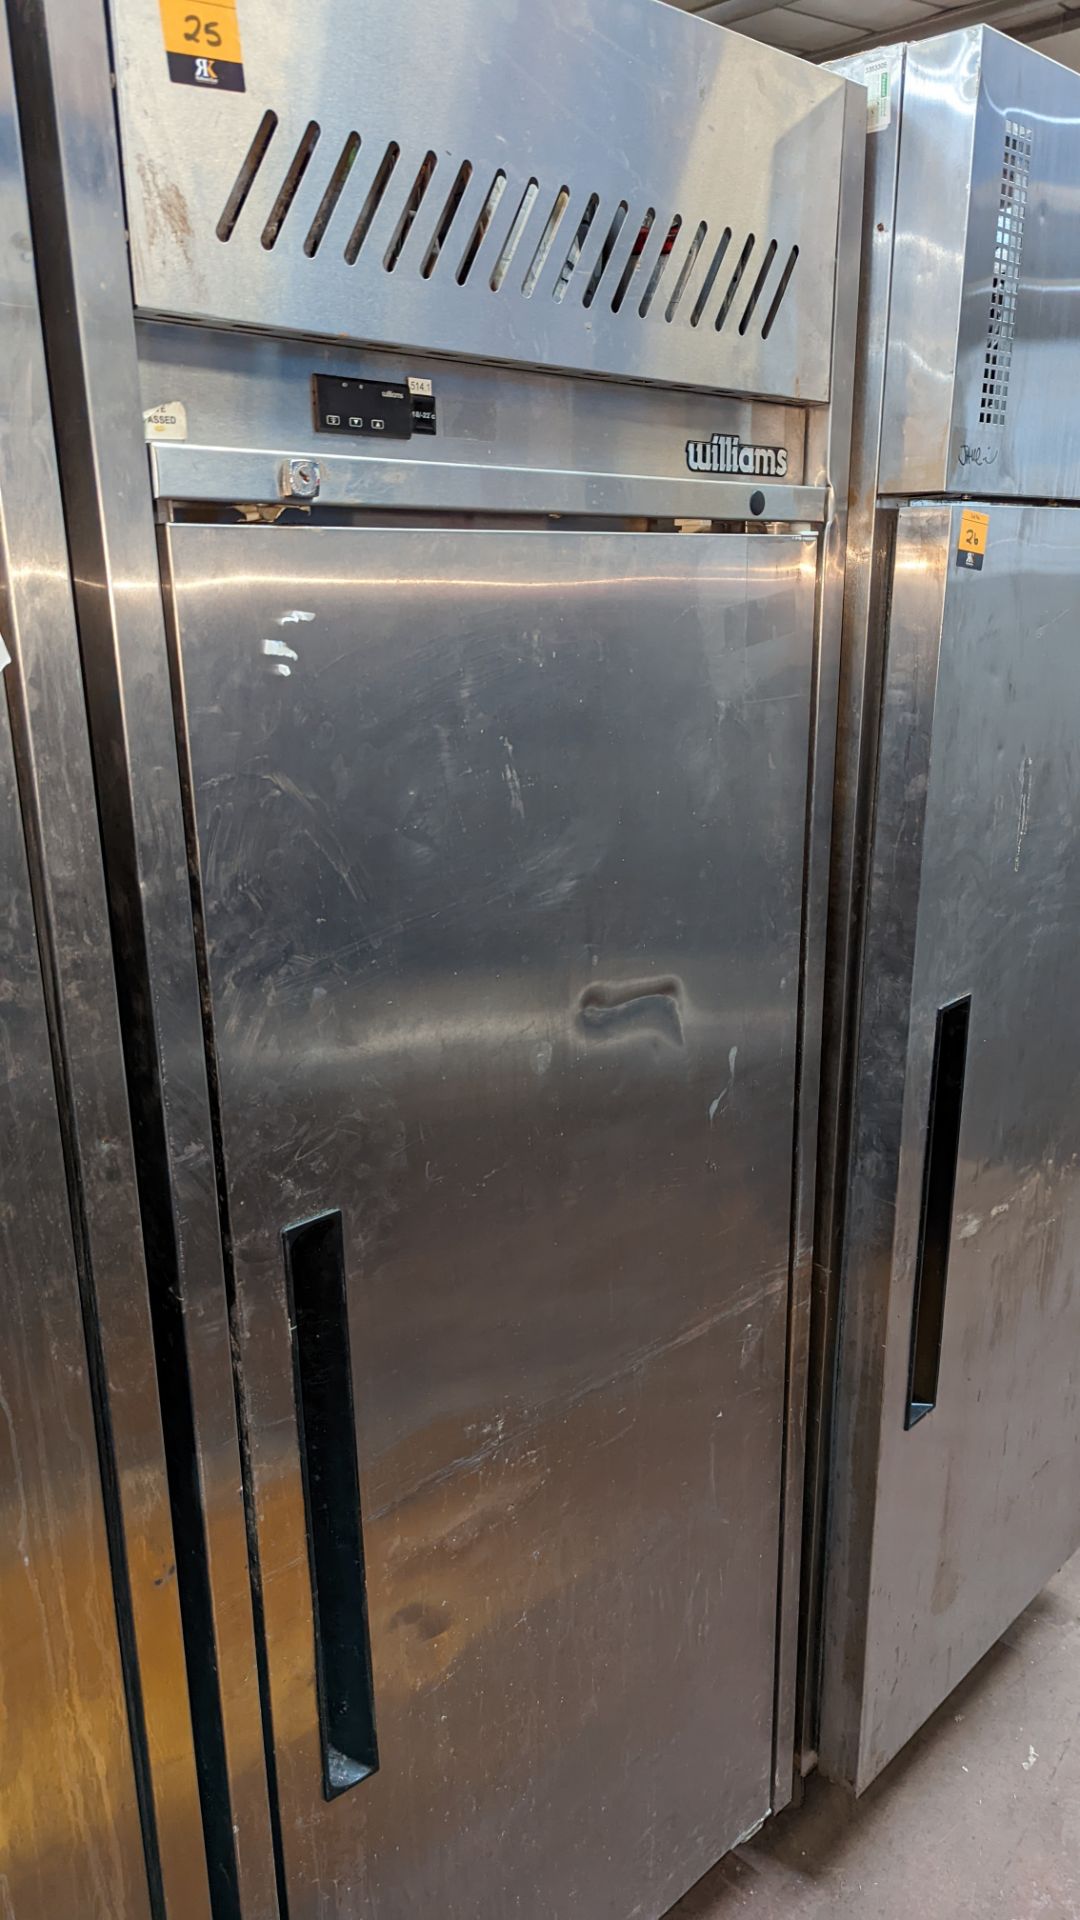 Williams stainless steel commercial freezer